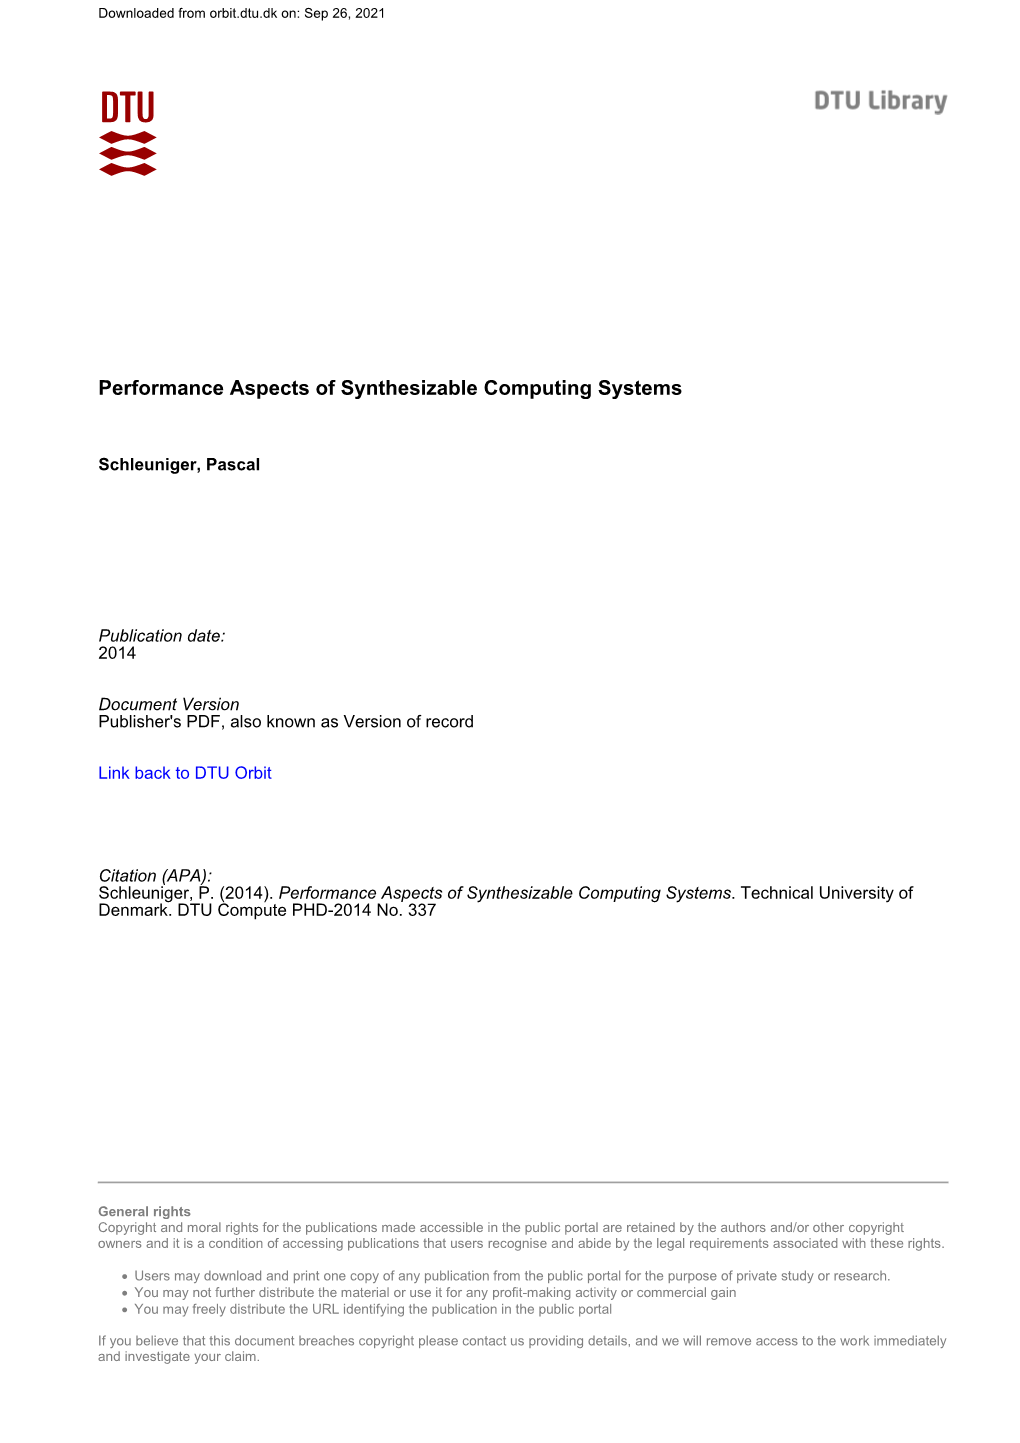 Performance Aspects of Synthesizable Computing Systems